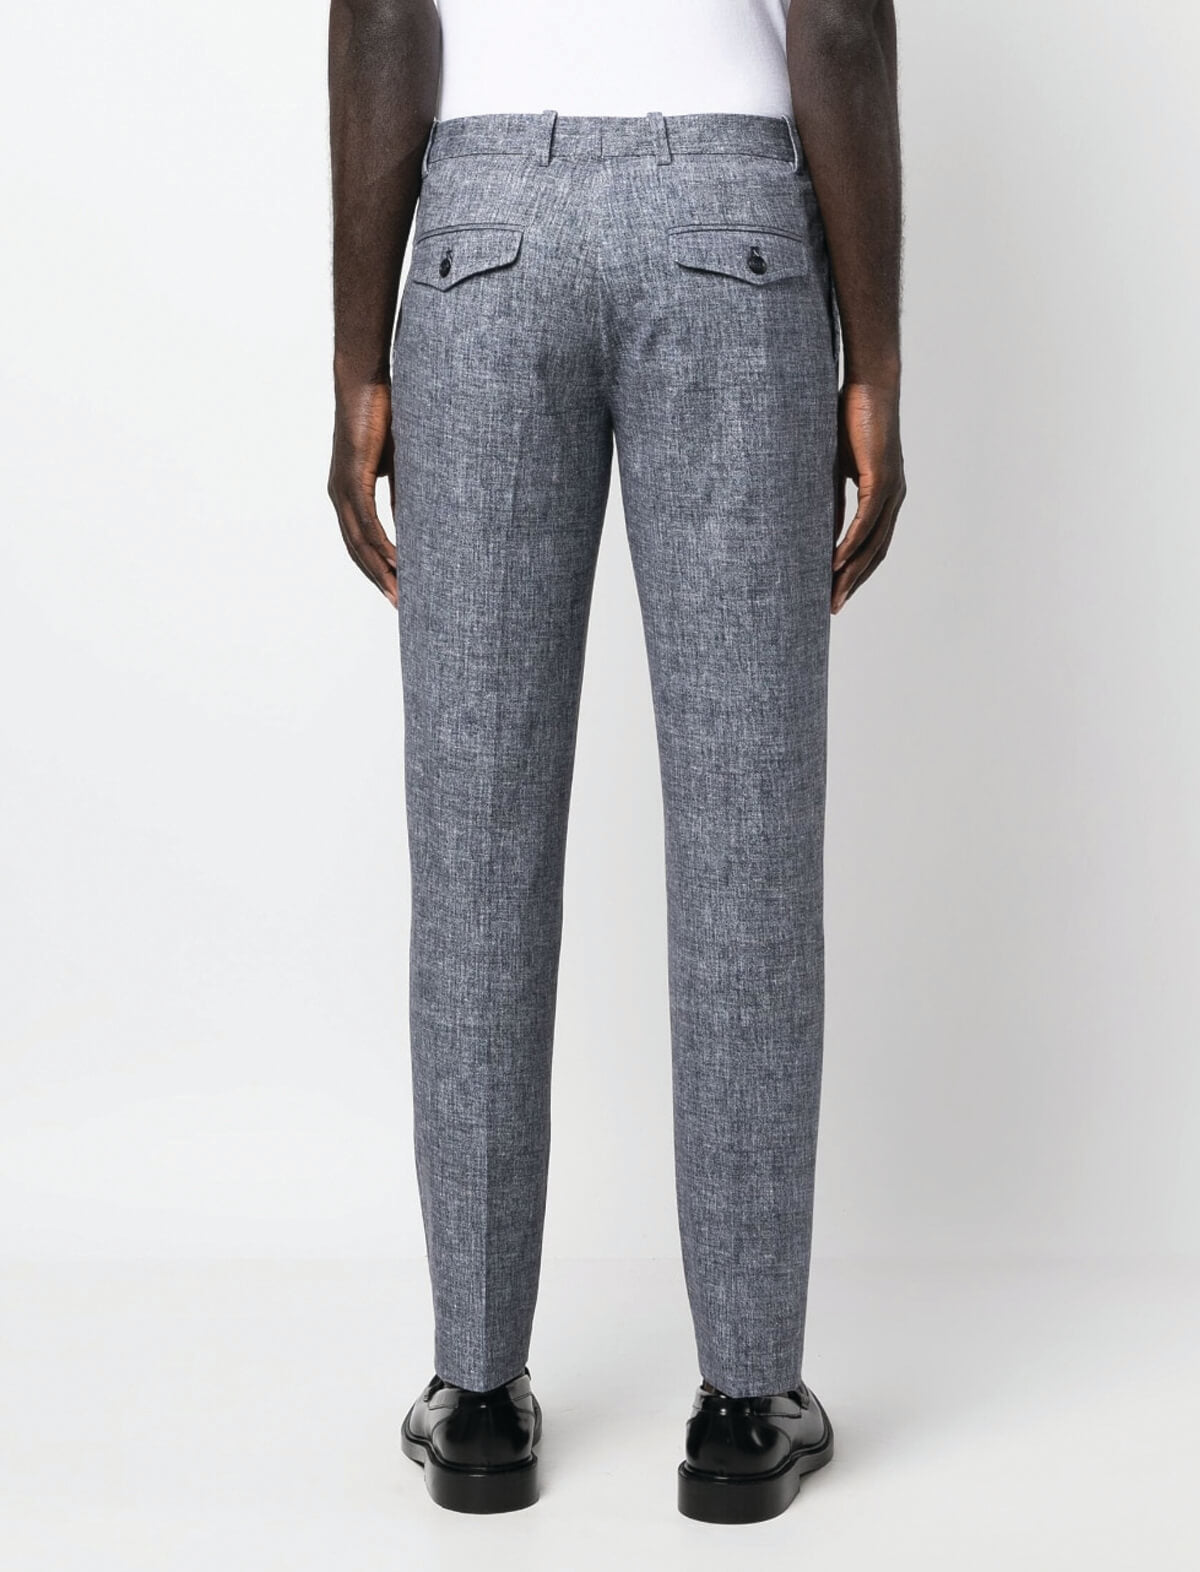 CIRCOLO 1901 Jersey Tailored Trousers in Blue Piquet